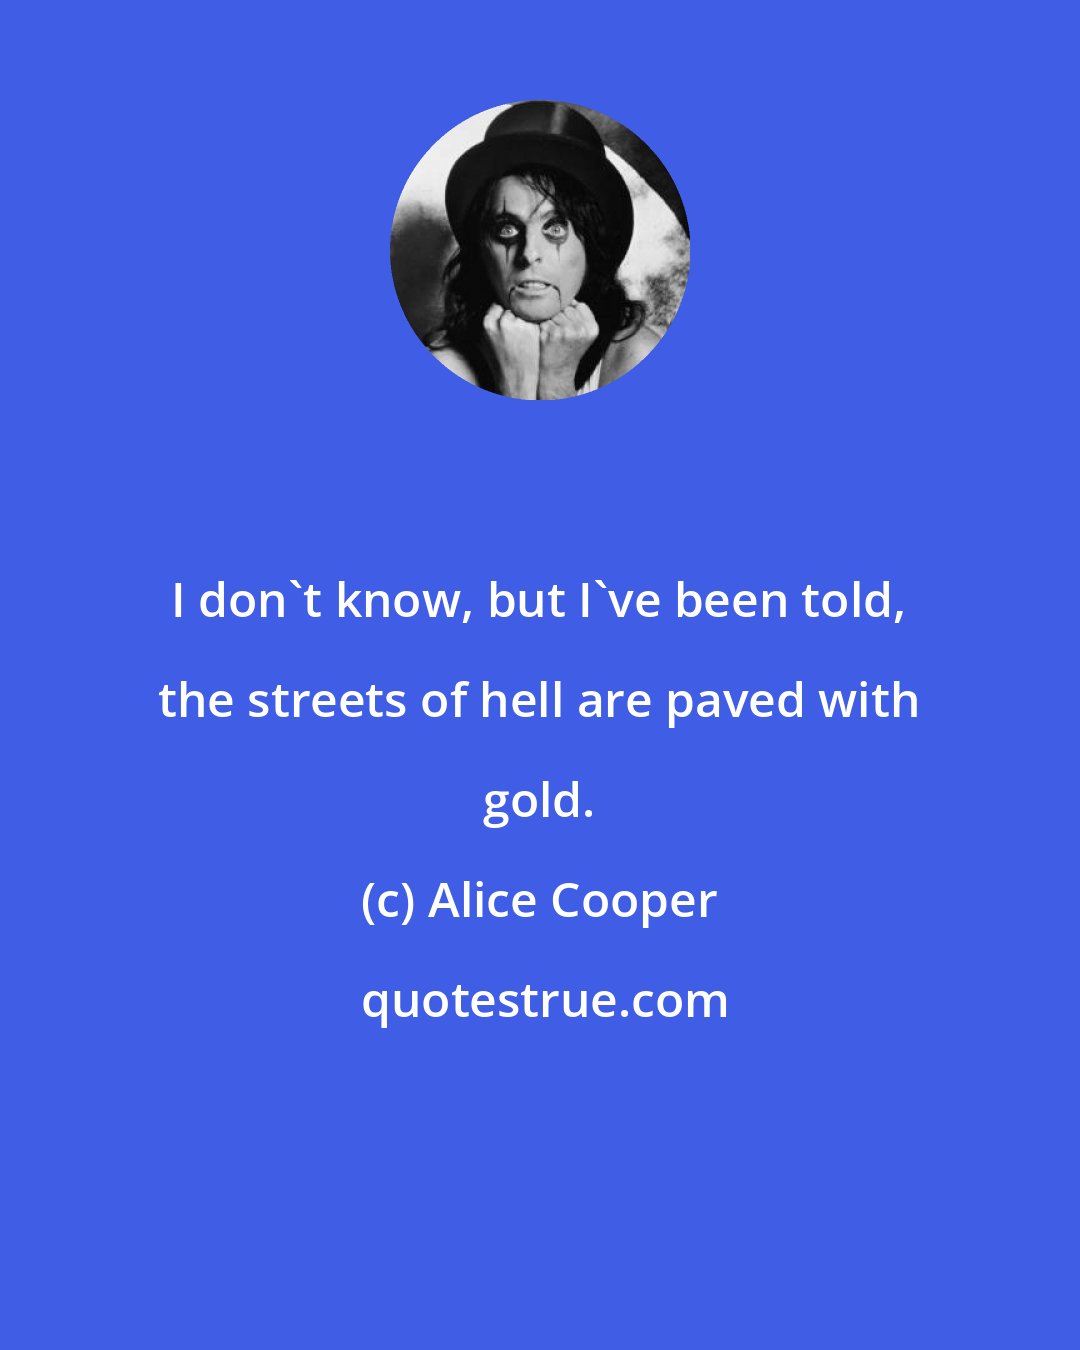 Alice Cooper: I don't know, but I've been told, the streets of hell are paved with gold.